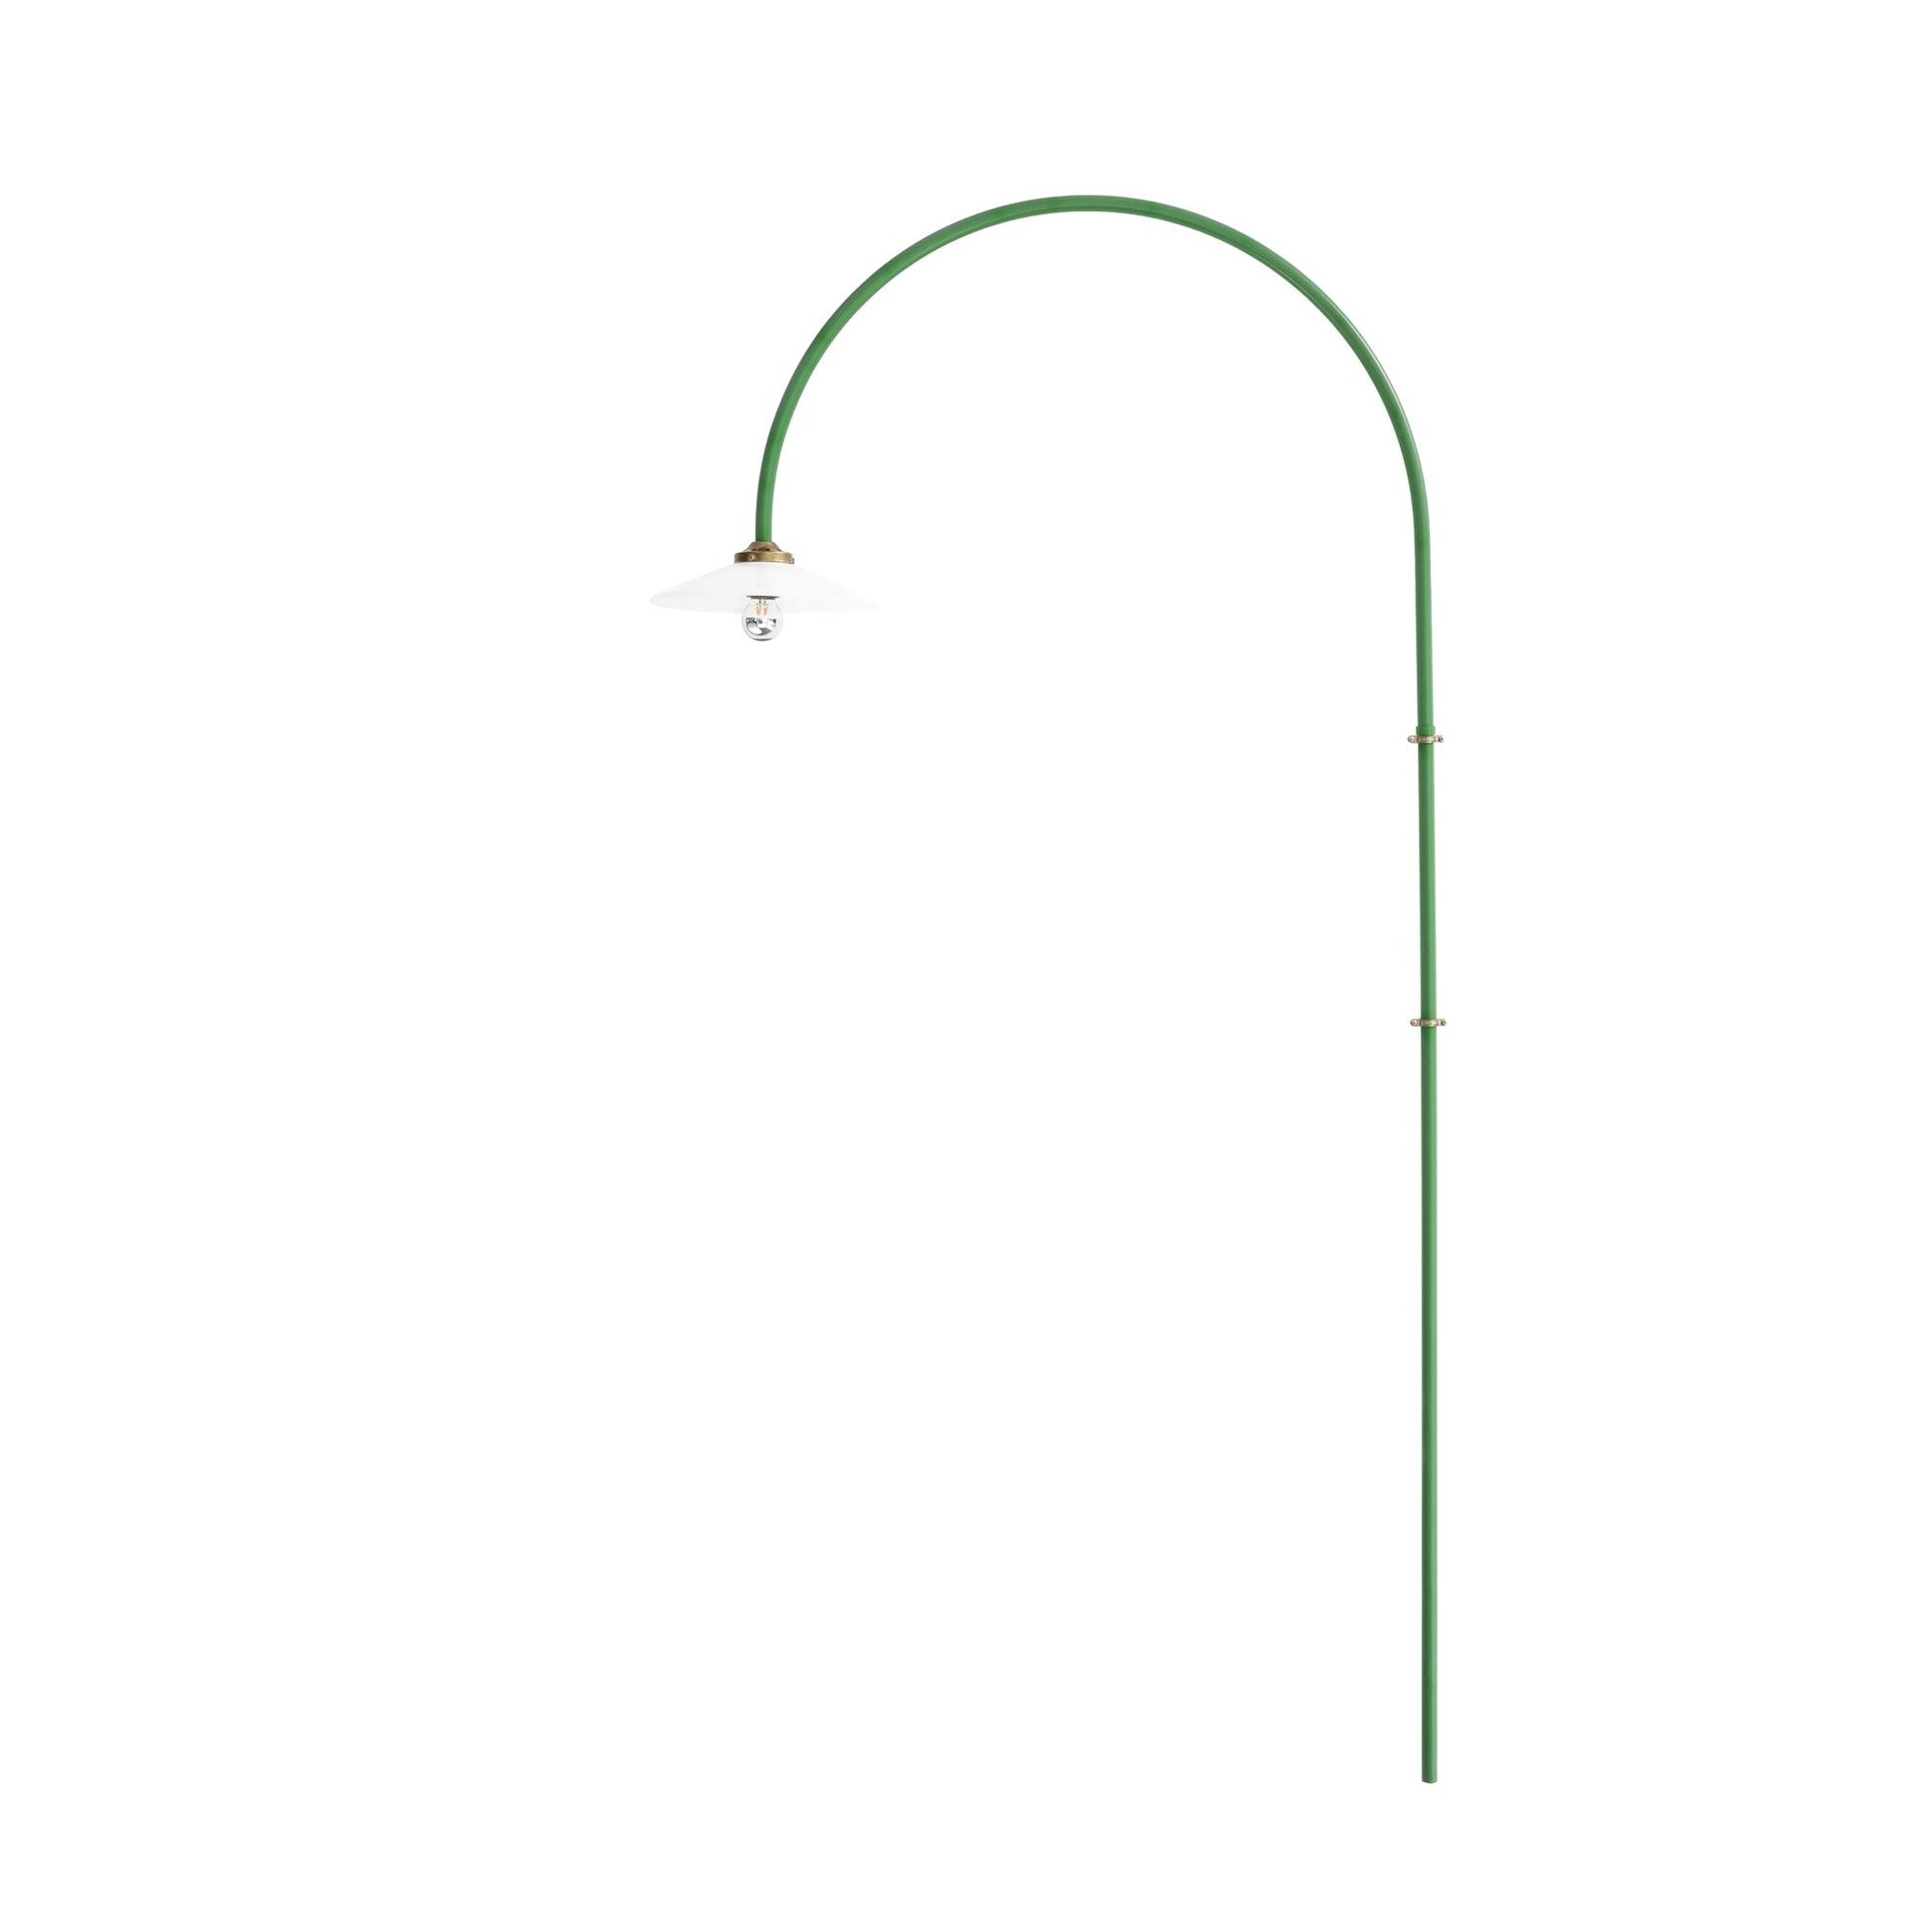 Hanging Lamp N°2 Wall Lamp by Valerie Objects #Green